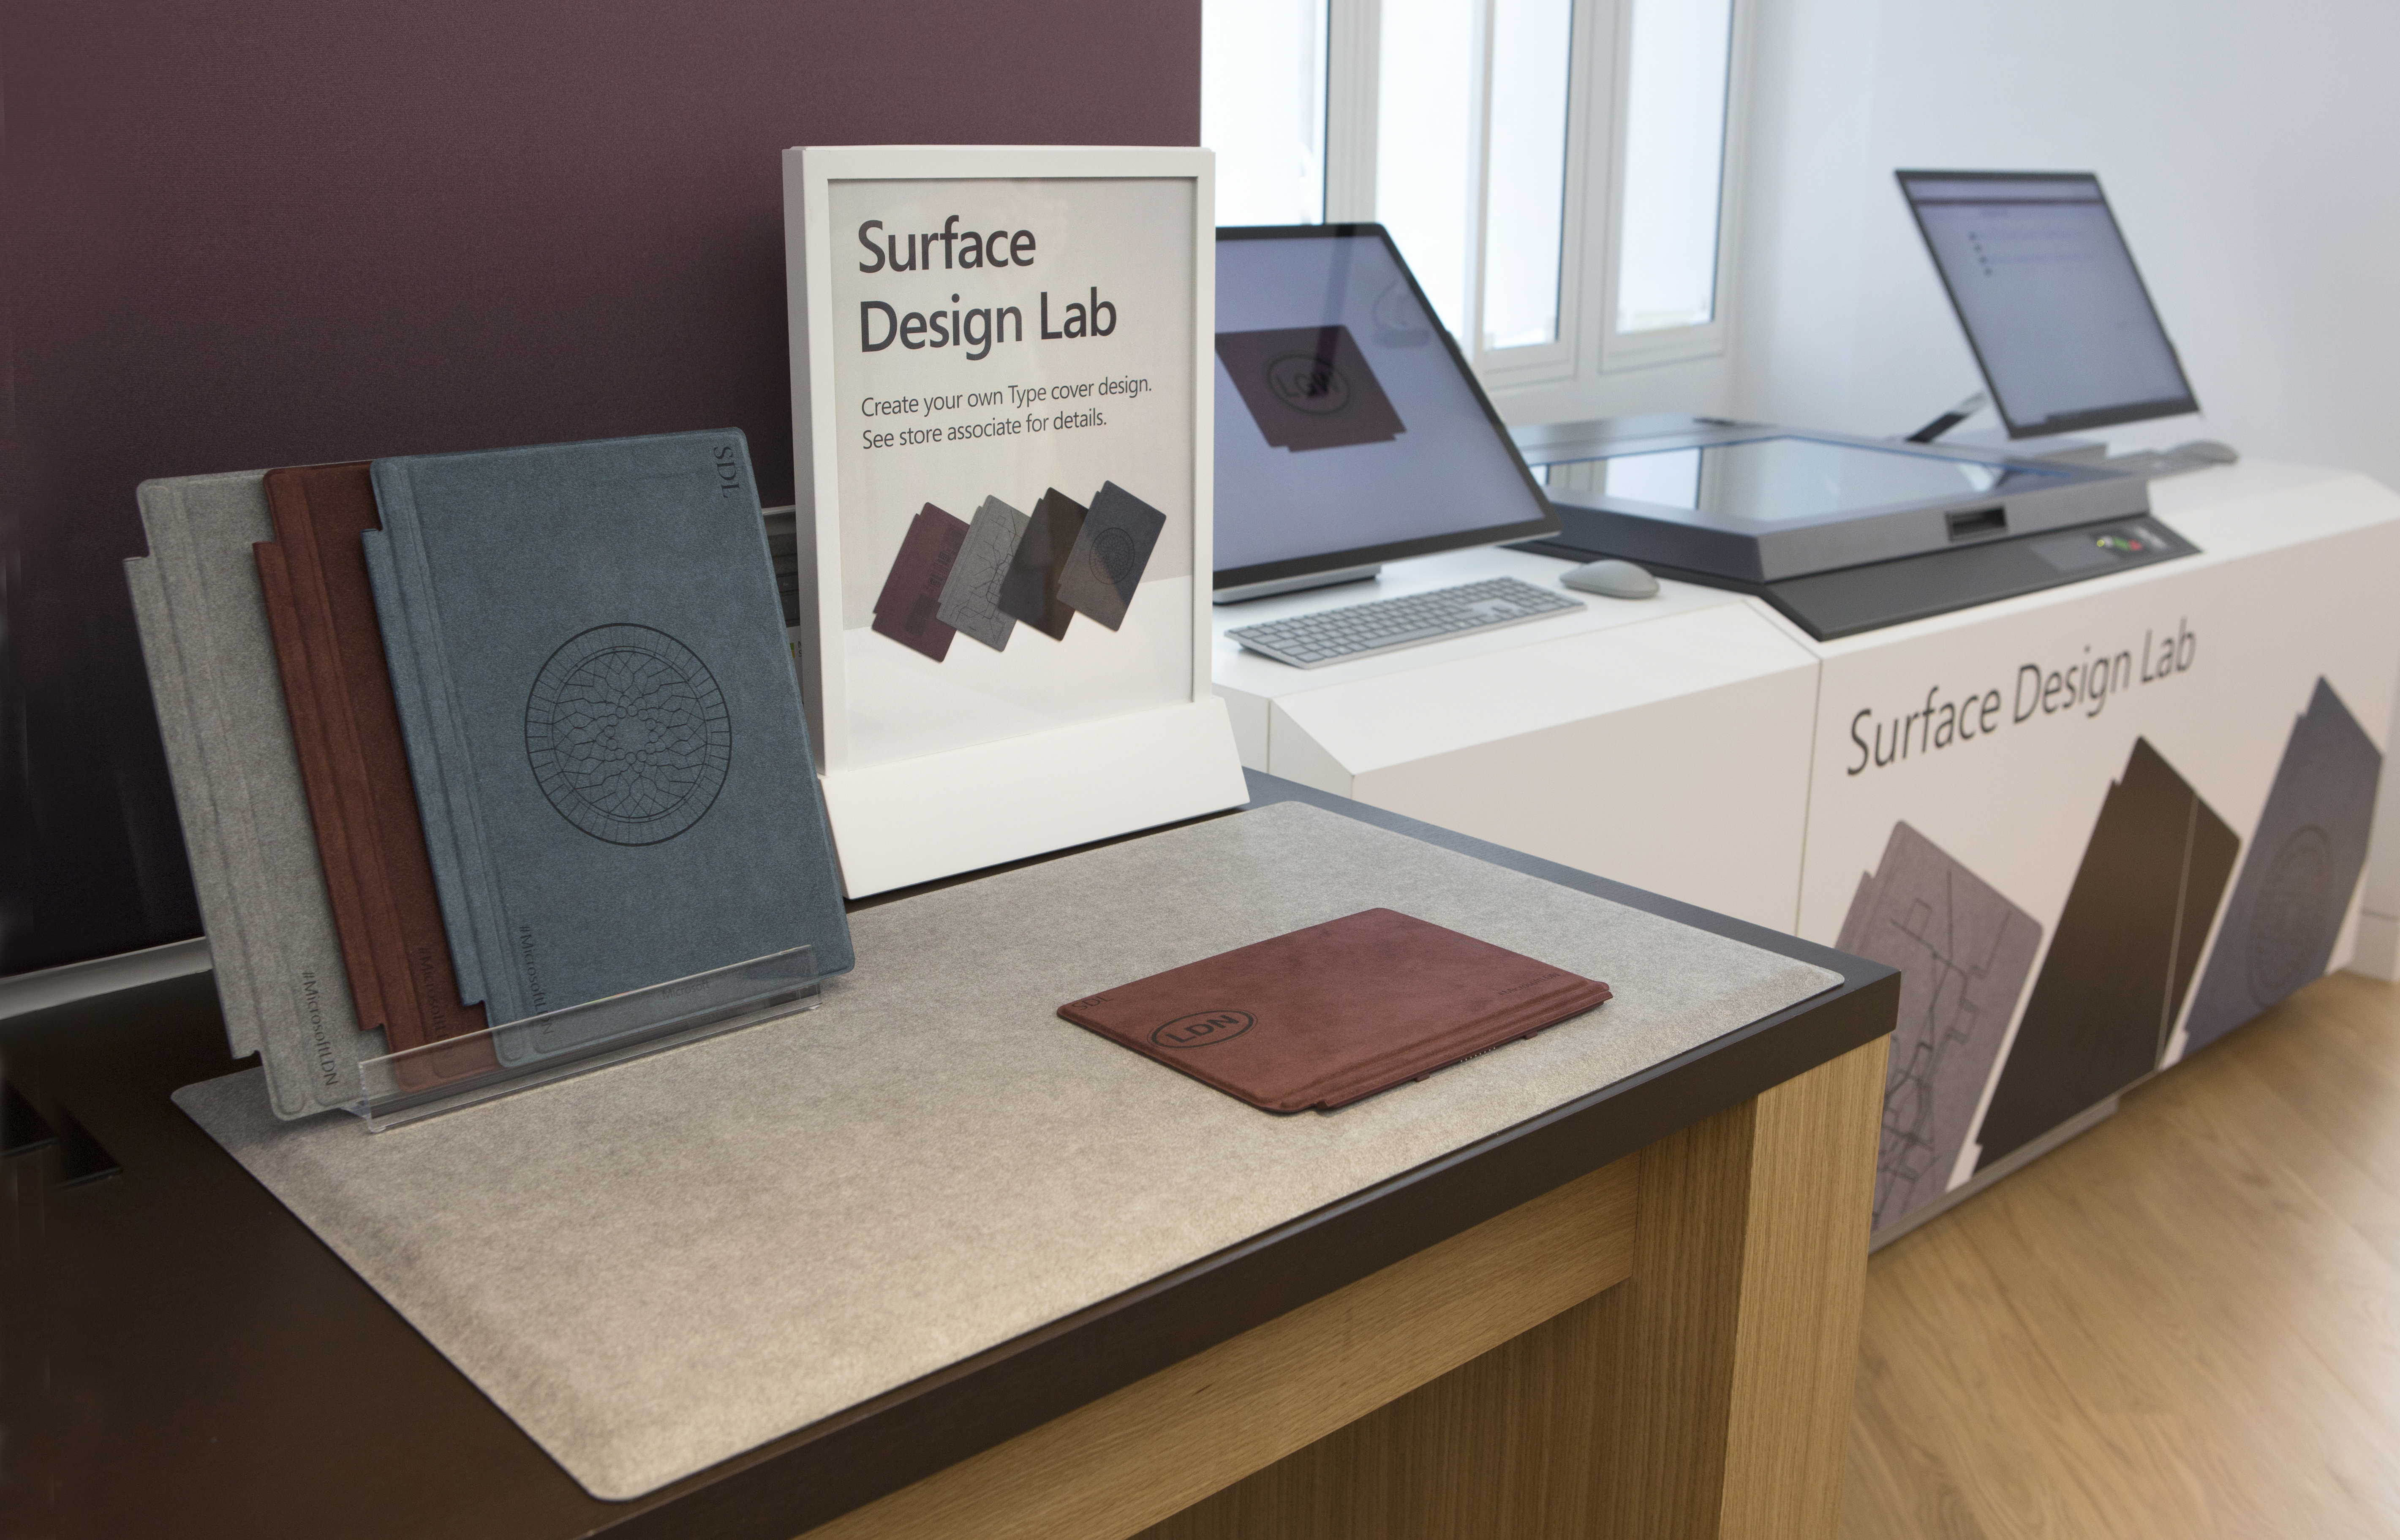 Surface devices in Microsoft's London Store